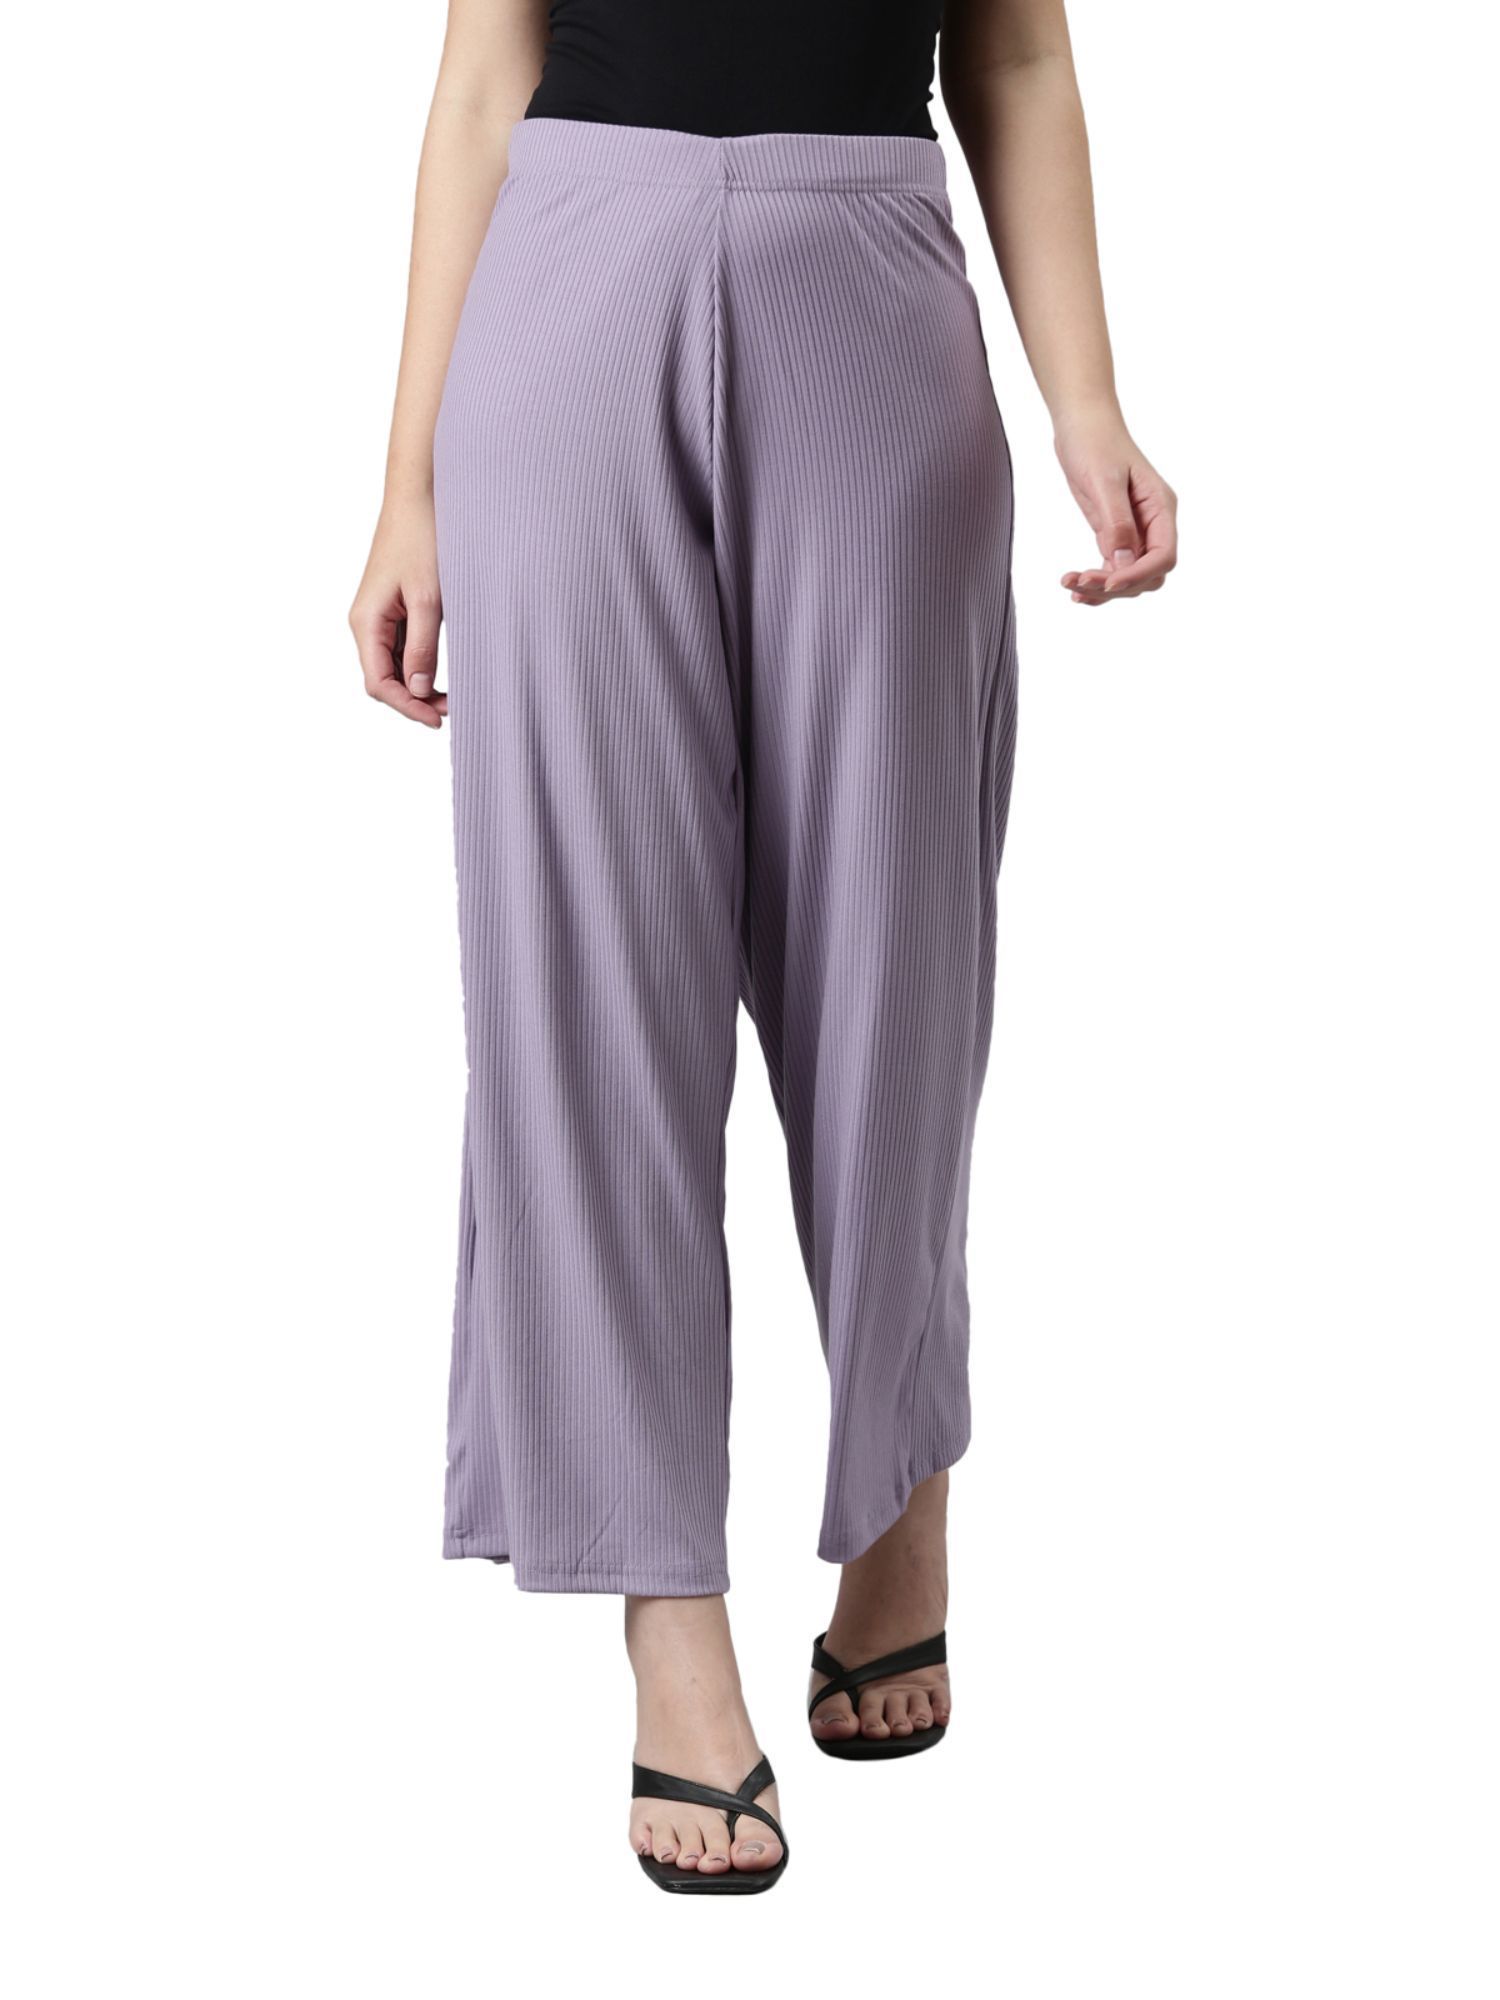 GO COLORS Light Beige Pencil Pants Linen Blend in Chennai at best price by Go  Colors (Head Office) - Justdial